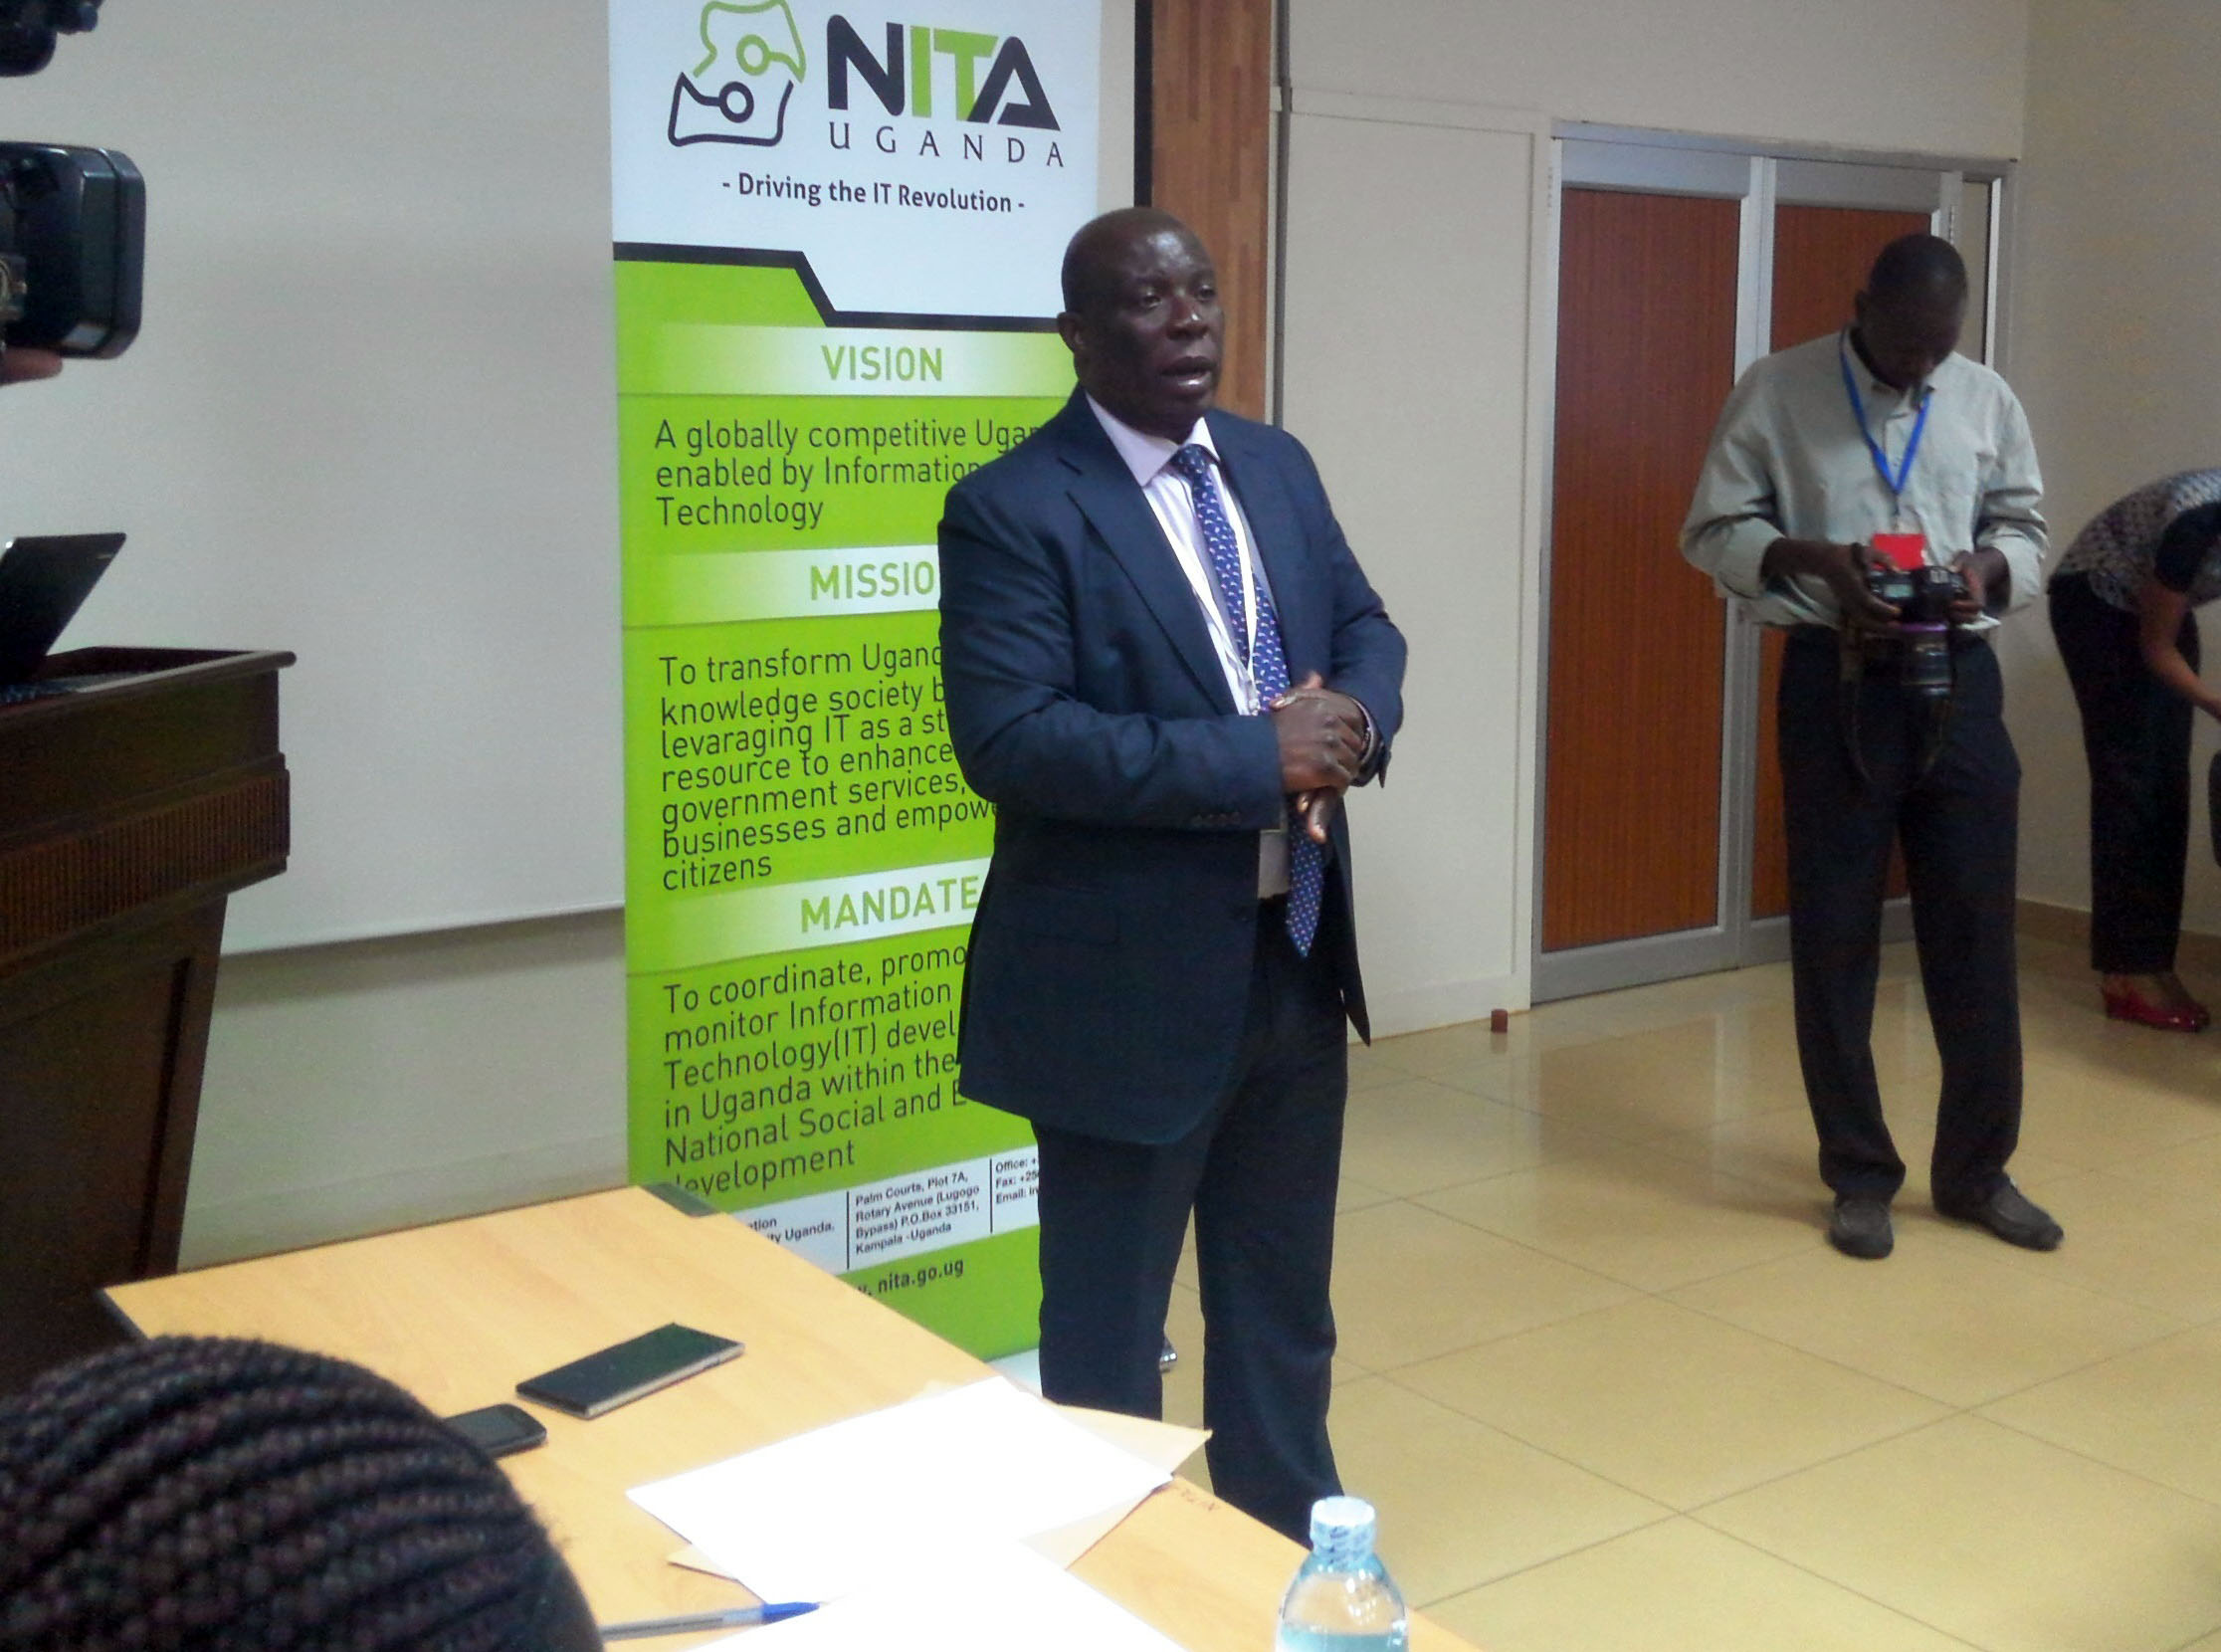 NITA Executive Director, Mr James Saaka also observed that the progress we are making as a country with internet penetration also presents challenges.